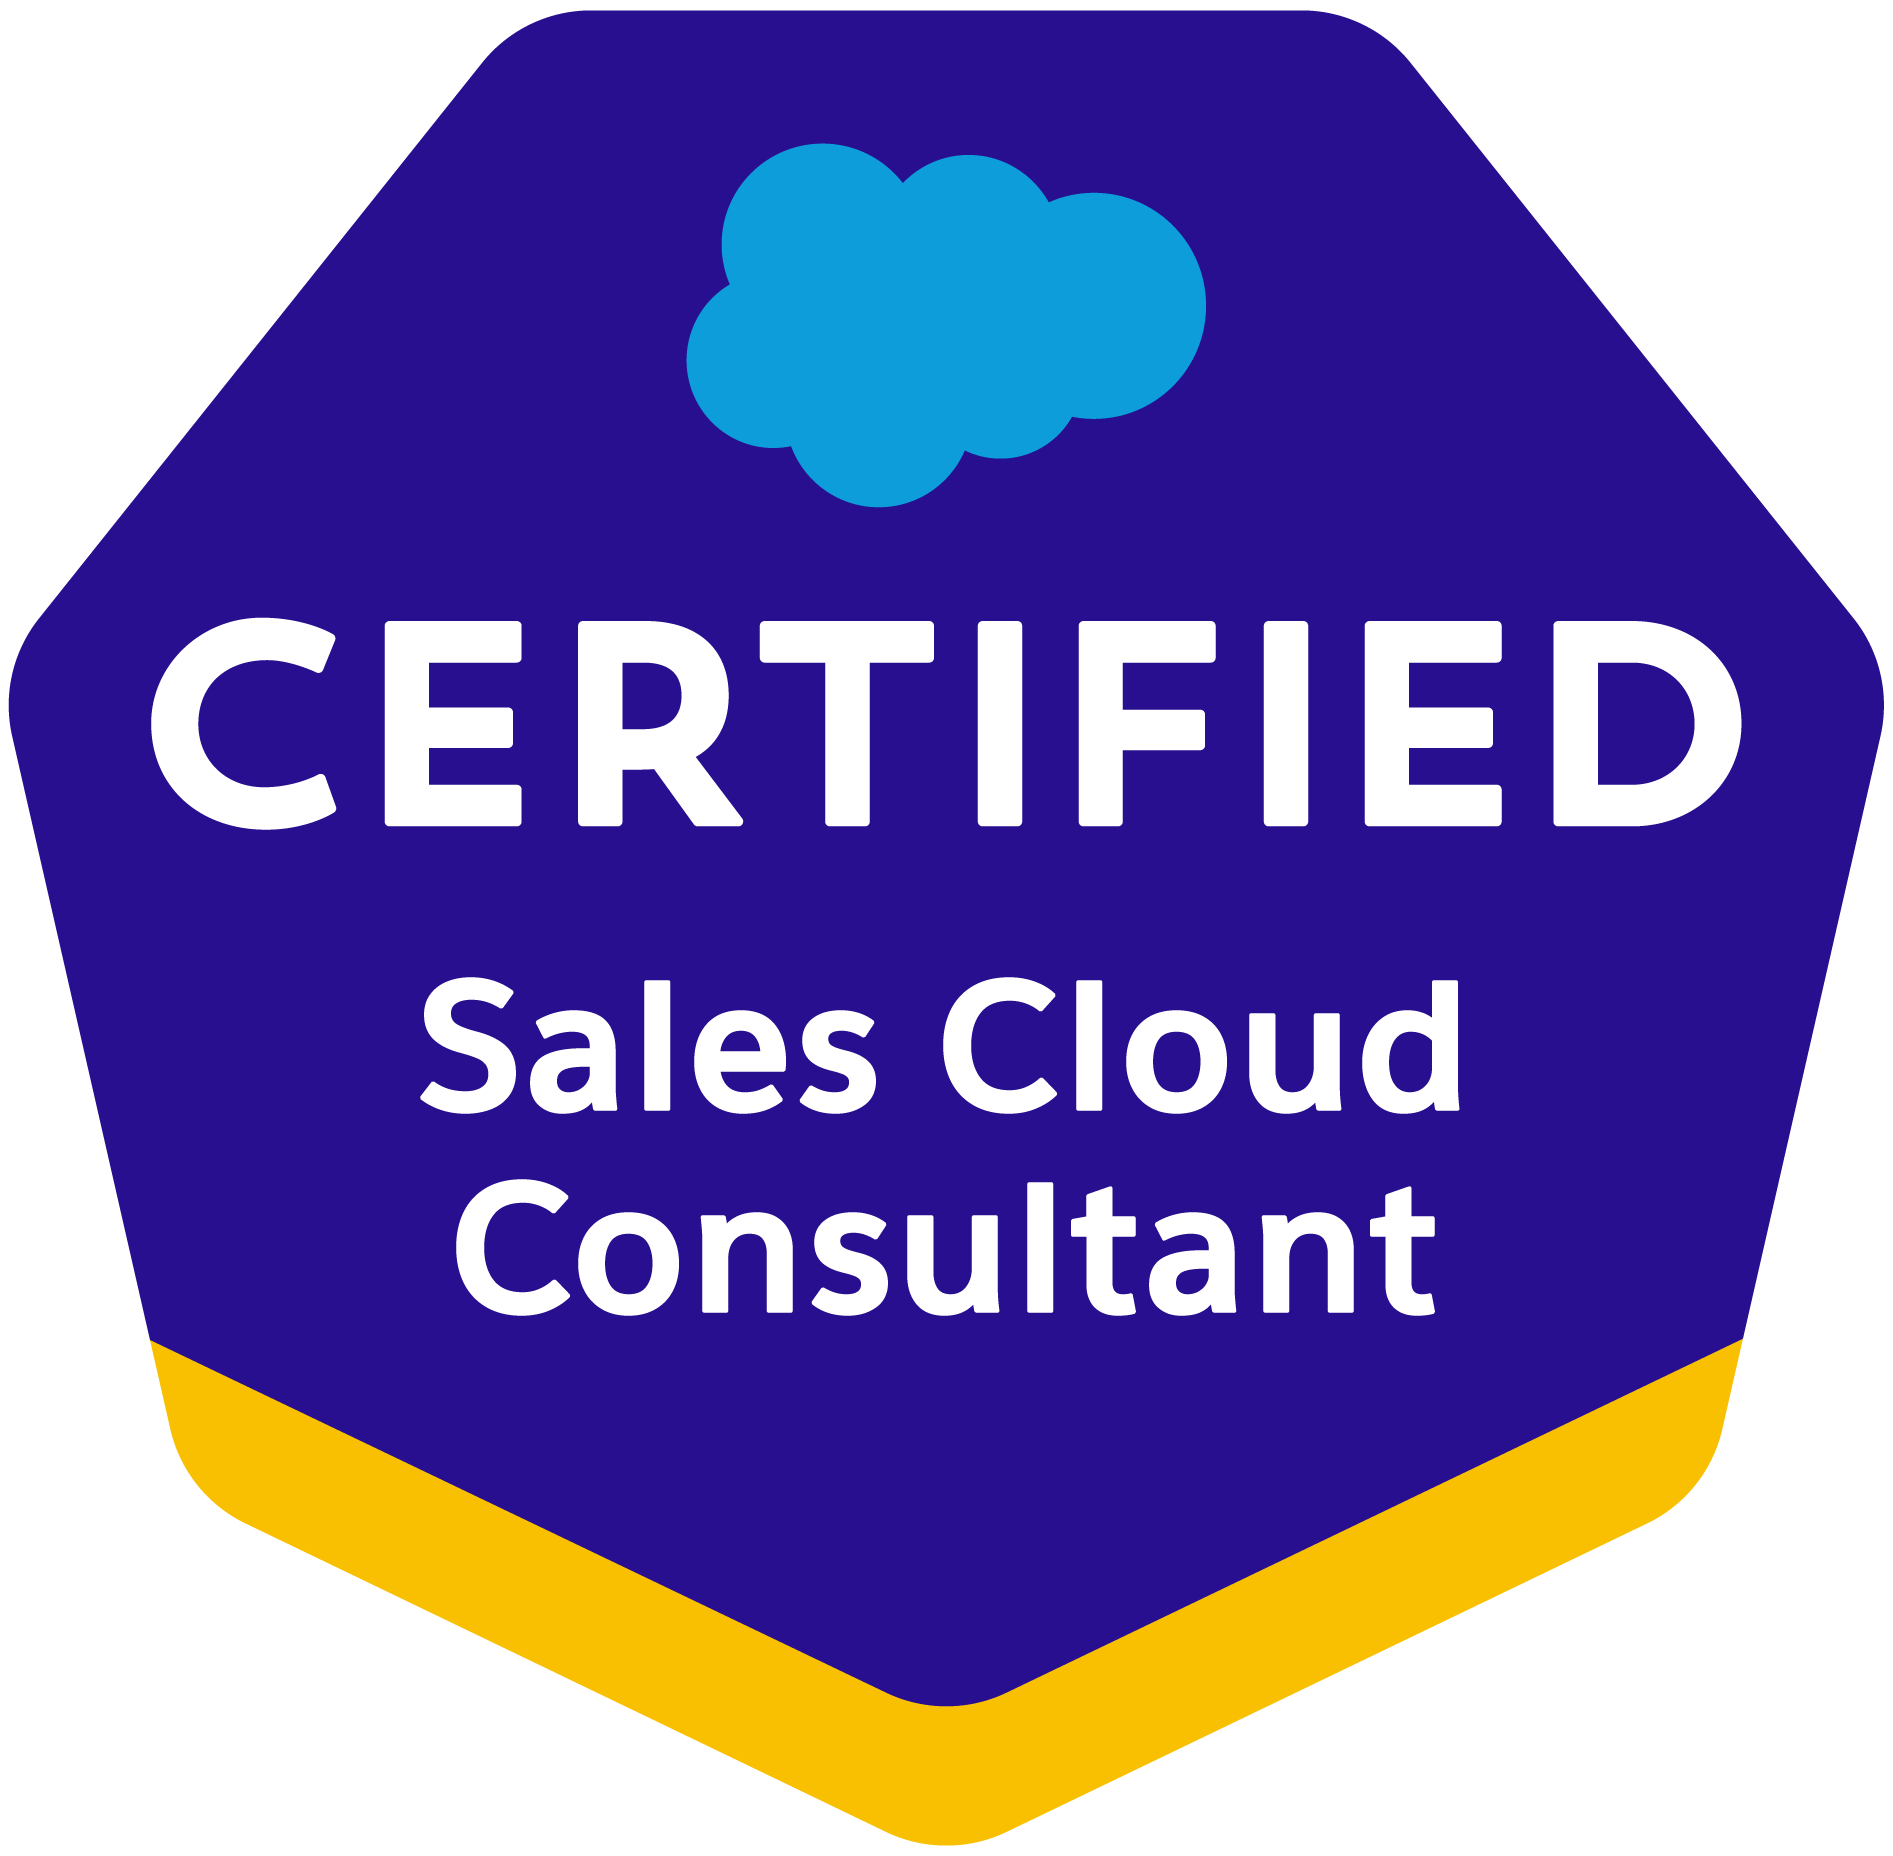 AMDIS certificated as Salesforce Sales Cloud Consultant